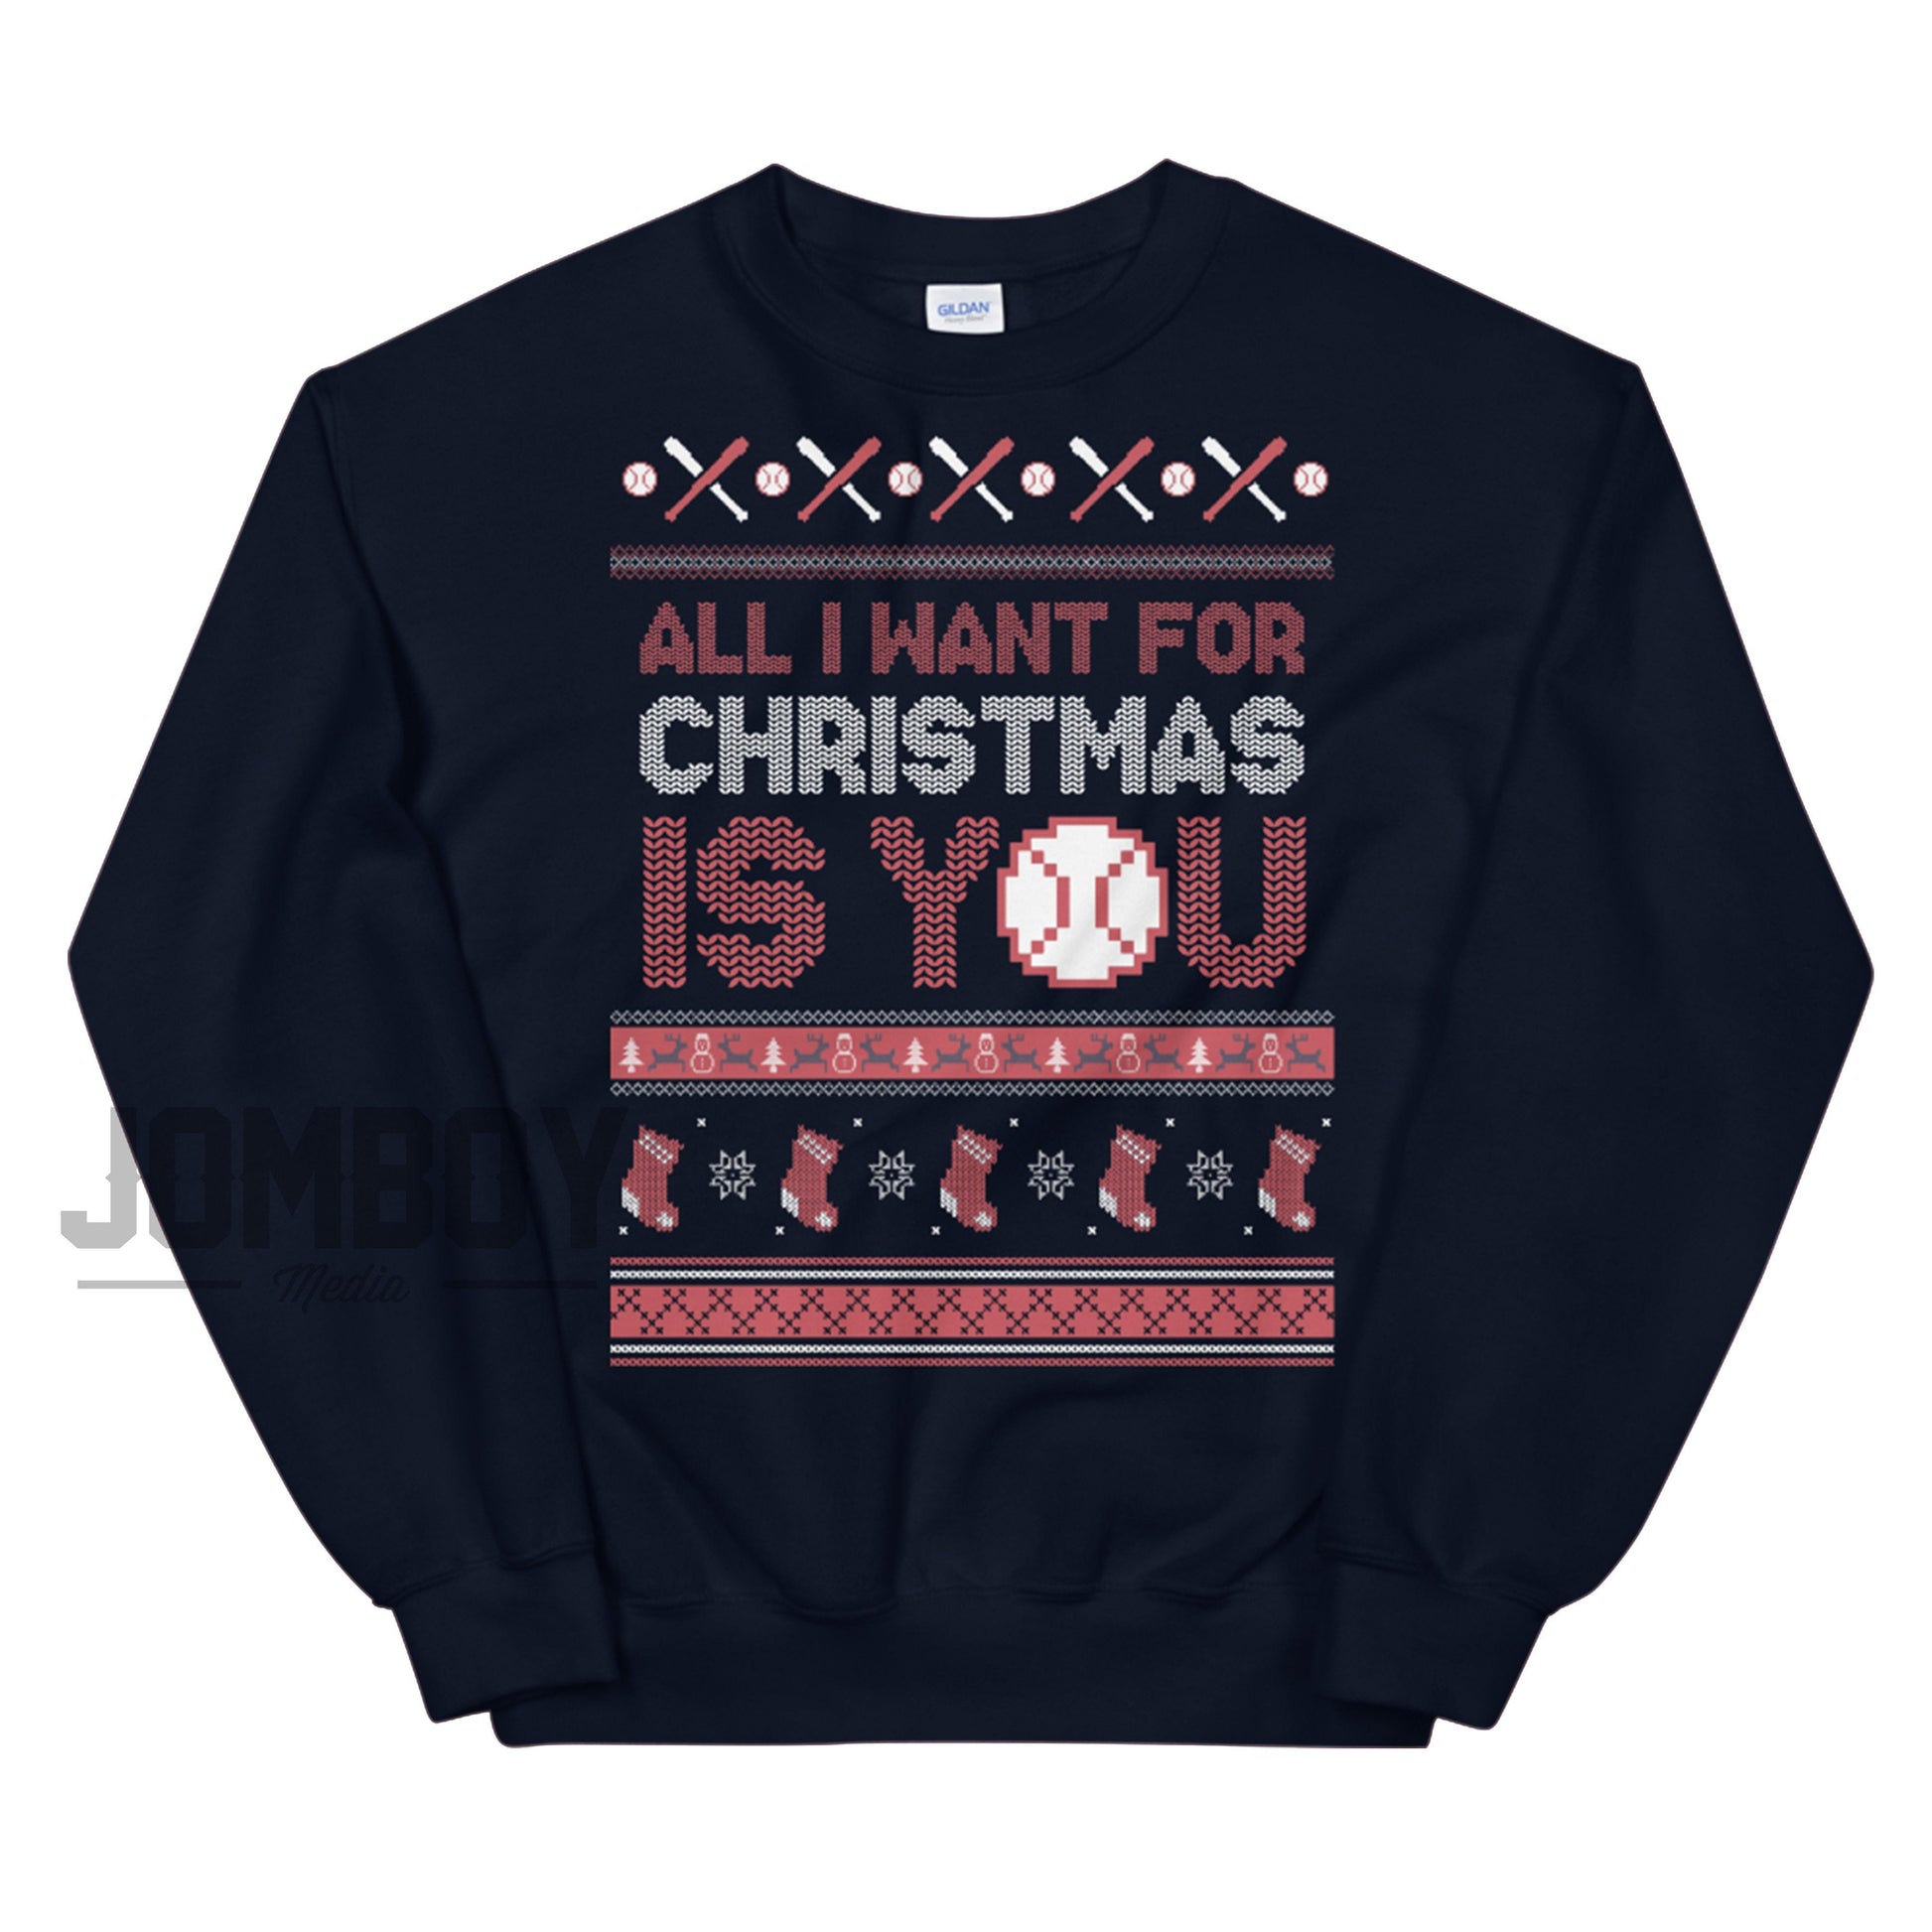 All I Want For Christmas Is You | Boston | Holiday Sweater - Jomboy Media